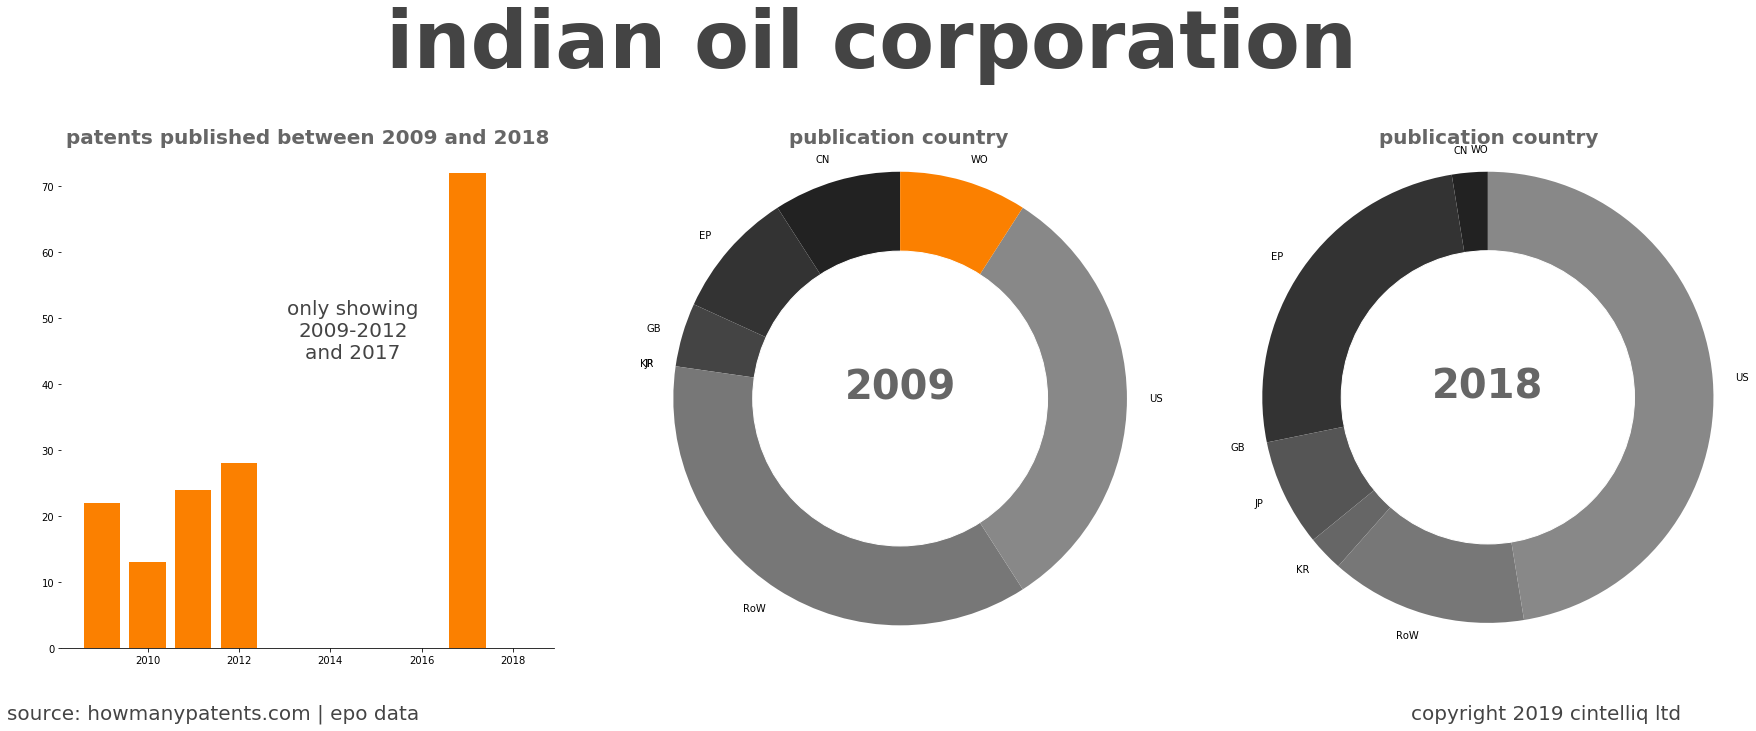 summary of patents for Indian Oil Corporation